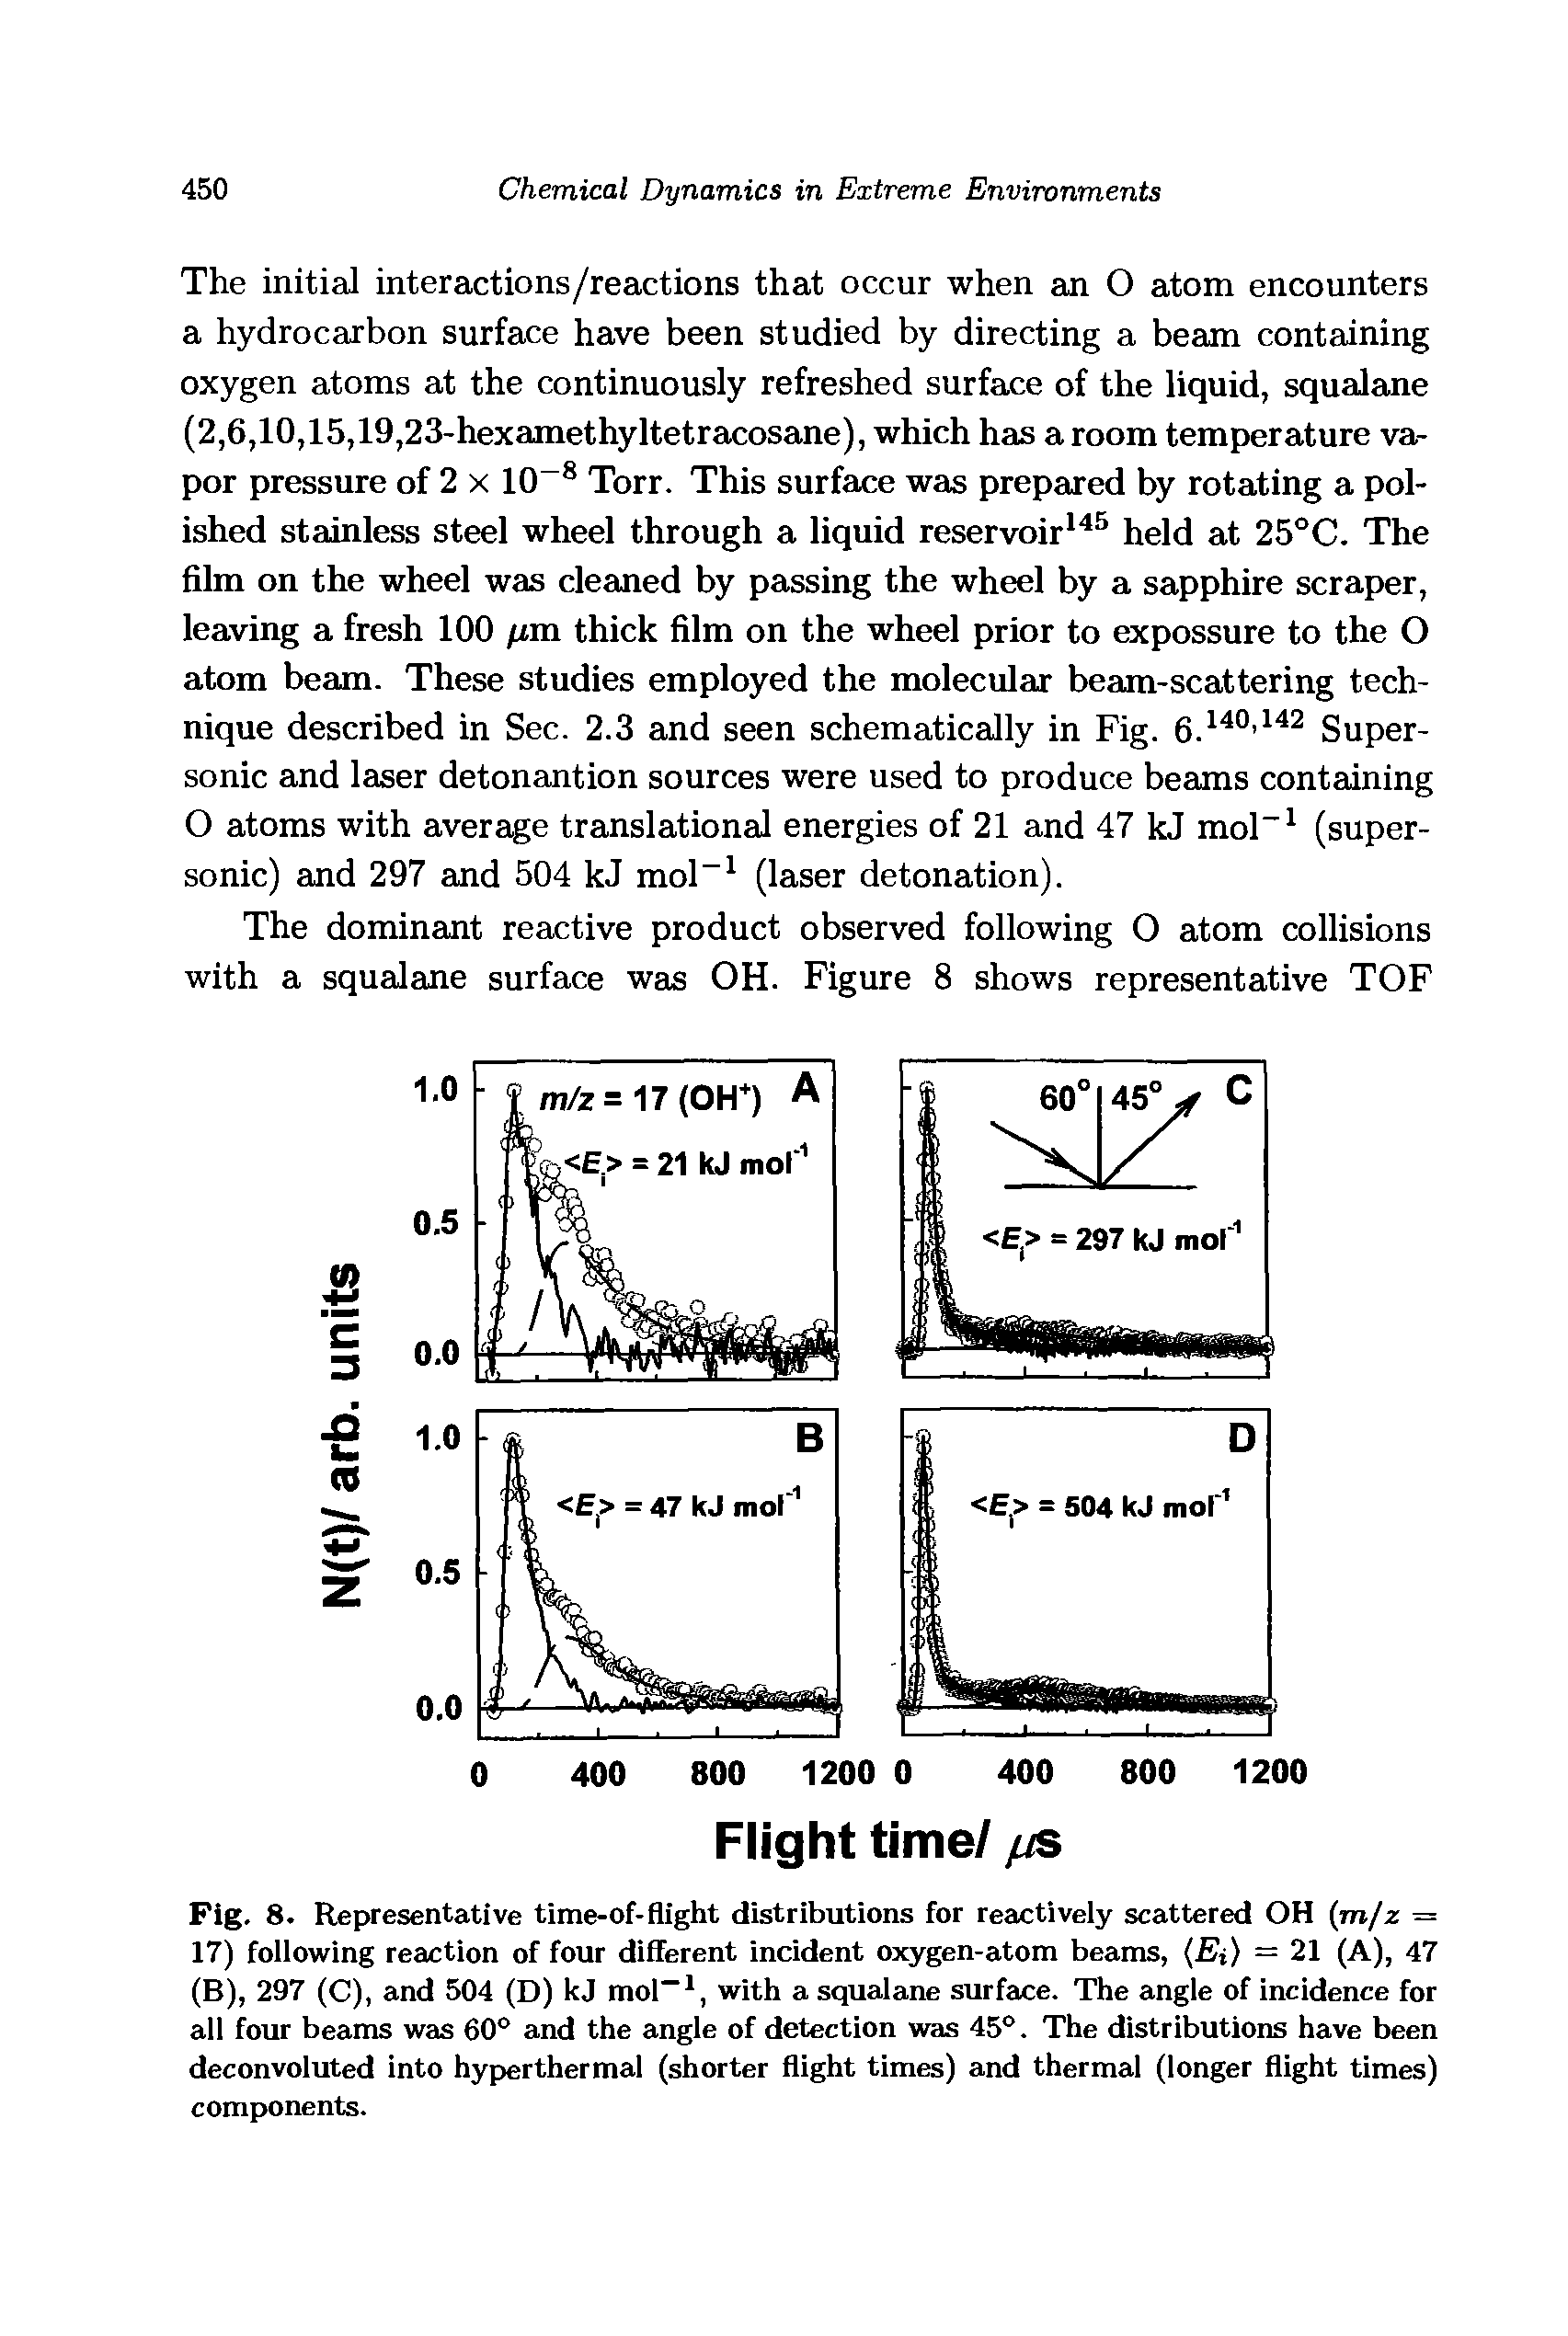 Fig. 8. Representative time-of-flight distributions for reactively scattered OH m/z = 17) following reaction of four different incident oxygen-atom beams, Ei) = 21 (A), 47 (B), 297 (C), and 504 (D) kJ mol, with a squalane surface. The angle of incidence for all four beams was 60° and the angle of detection was 45°. The distributions have been deconvolved into hyperthermal (shorter flight times) and thermal (longer flight times) components.